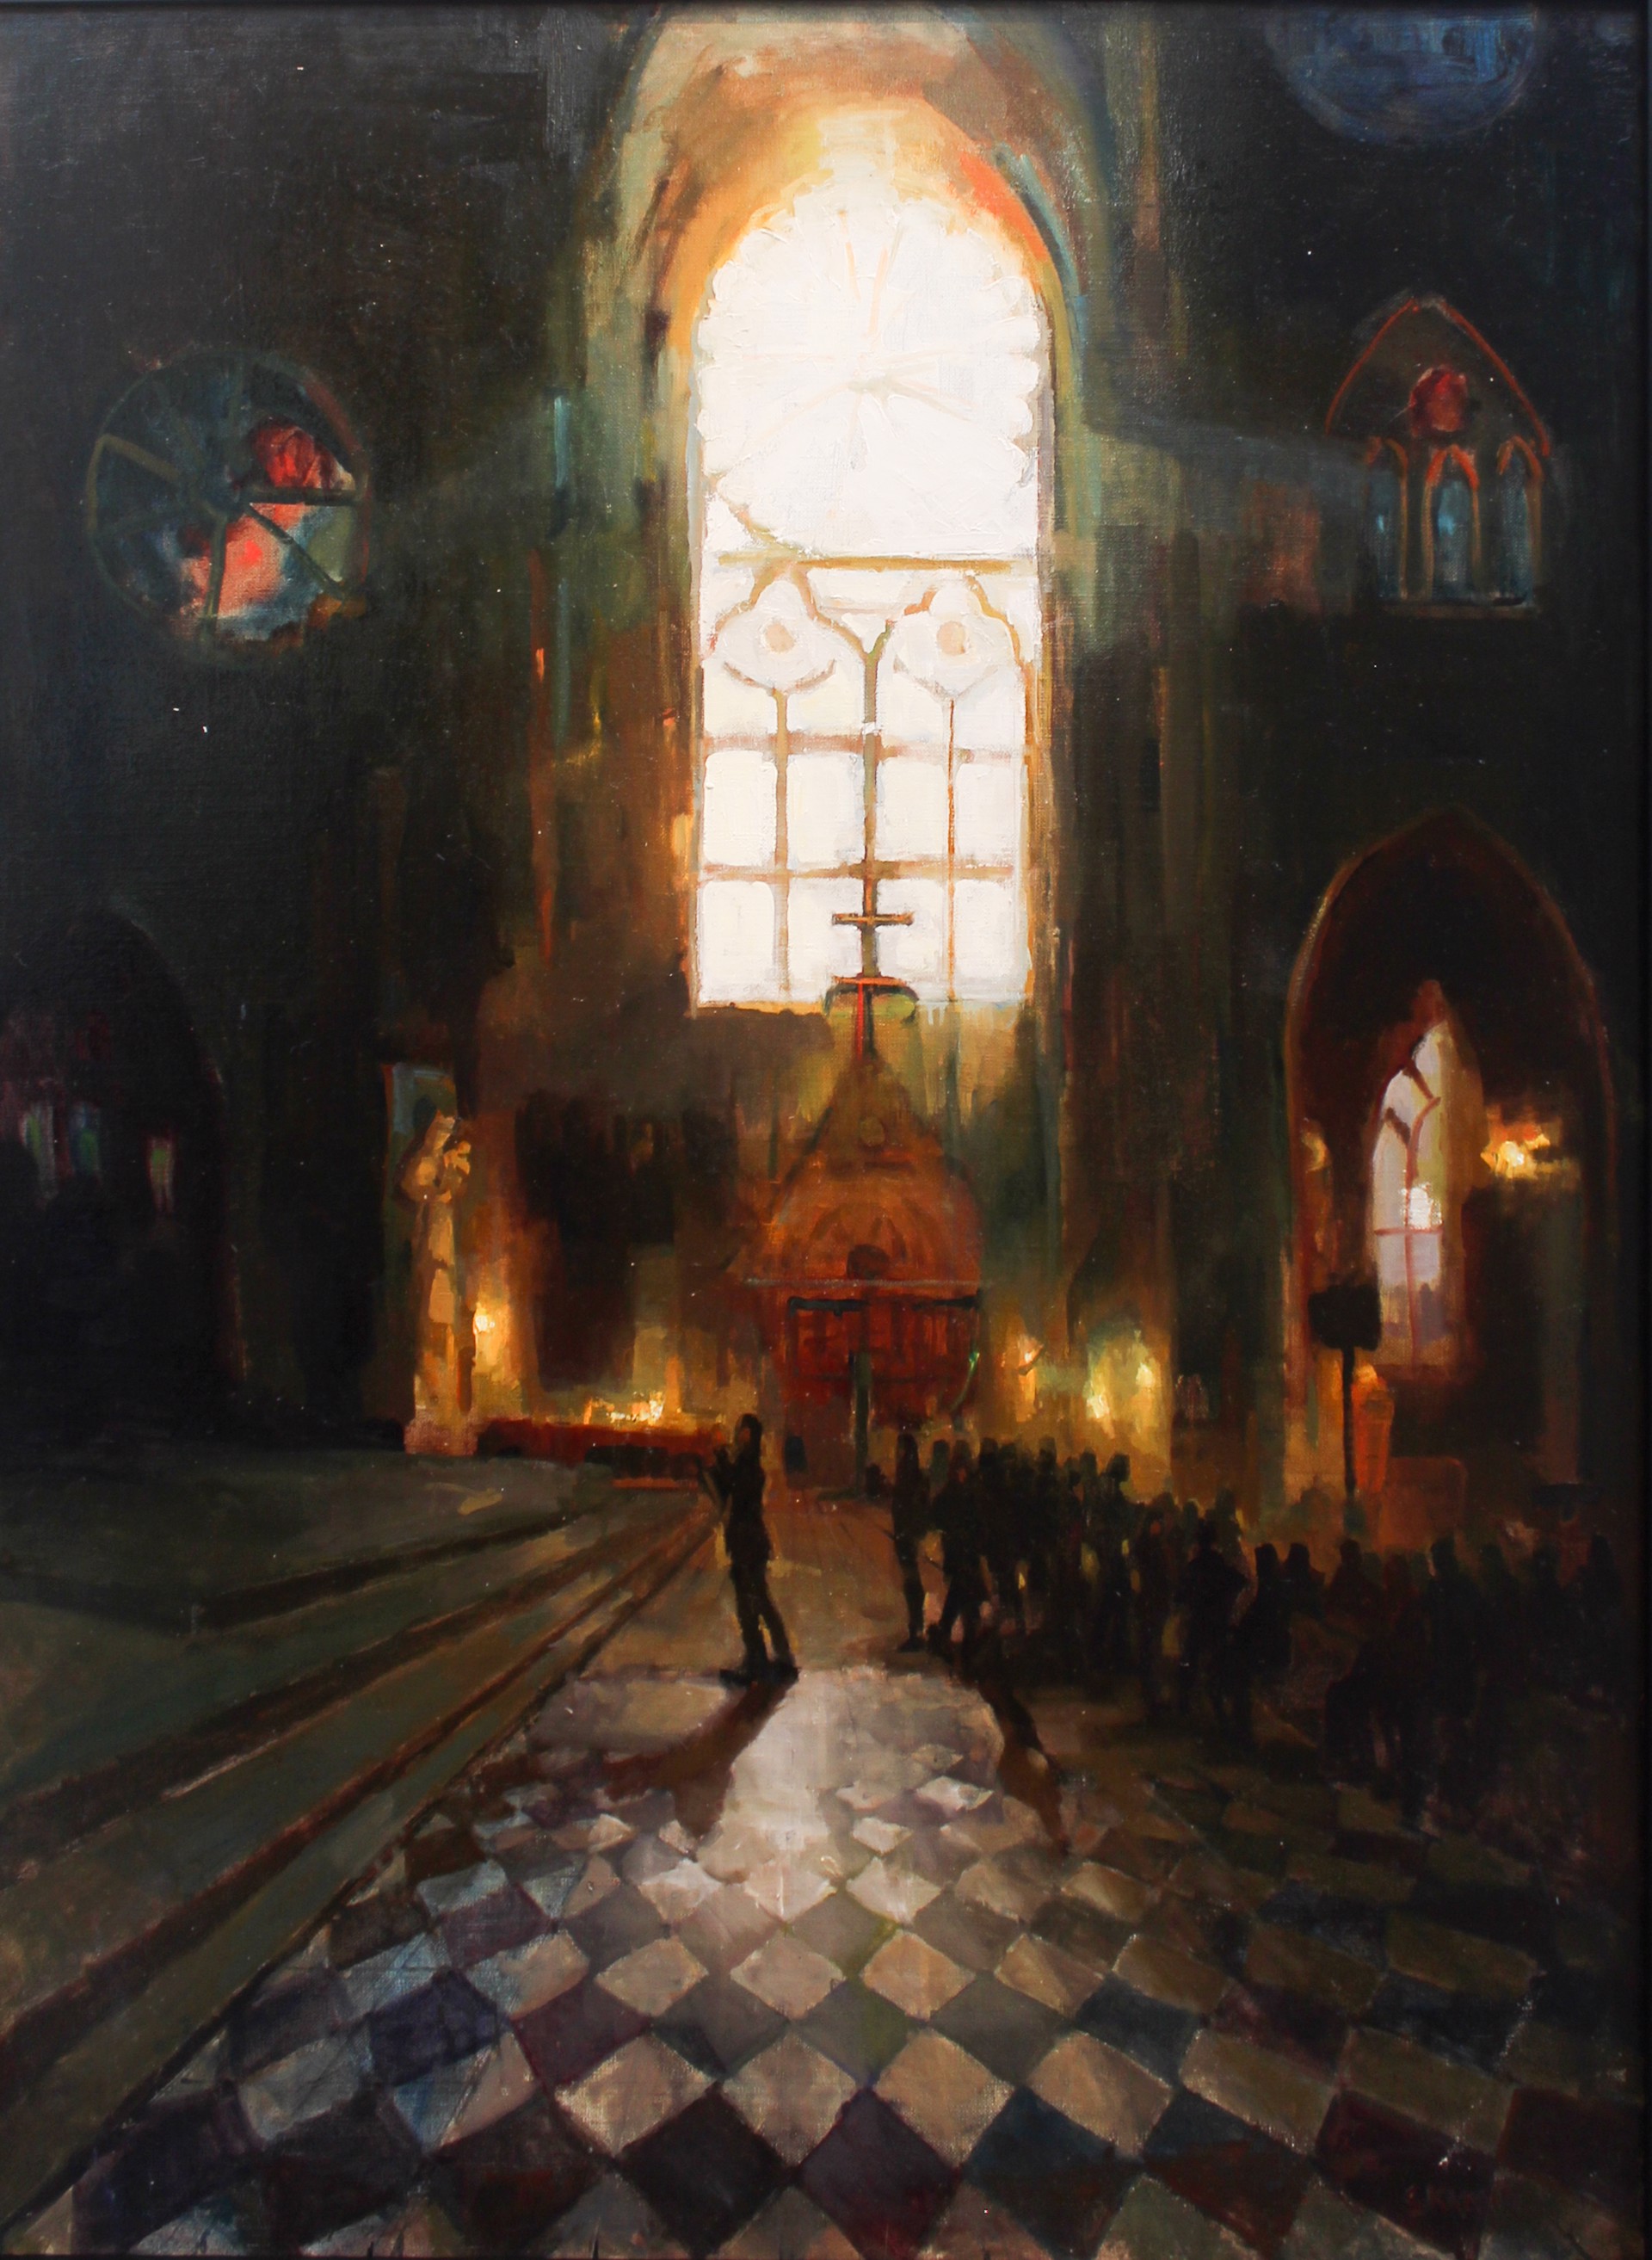 Cathedral by Stacy Kamin